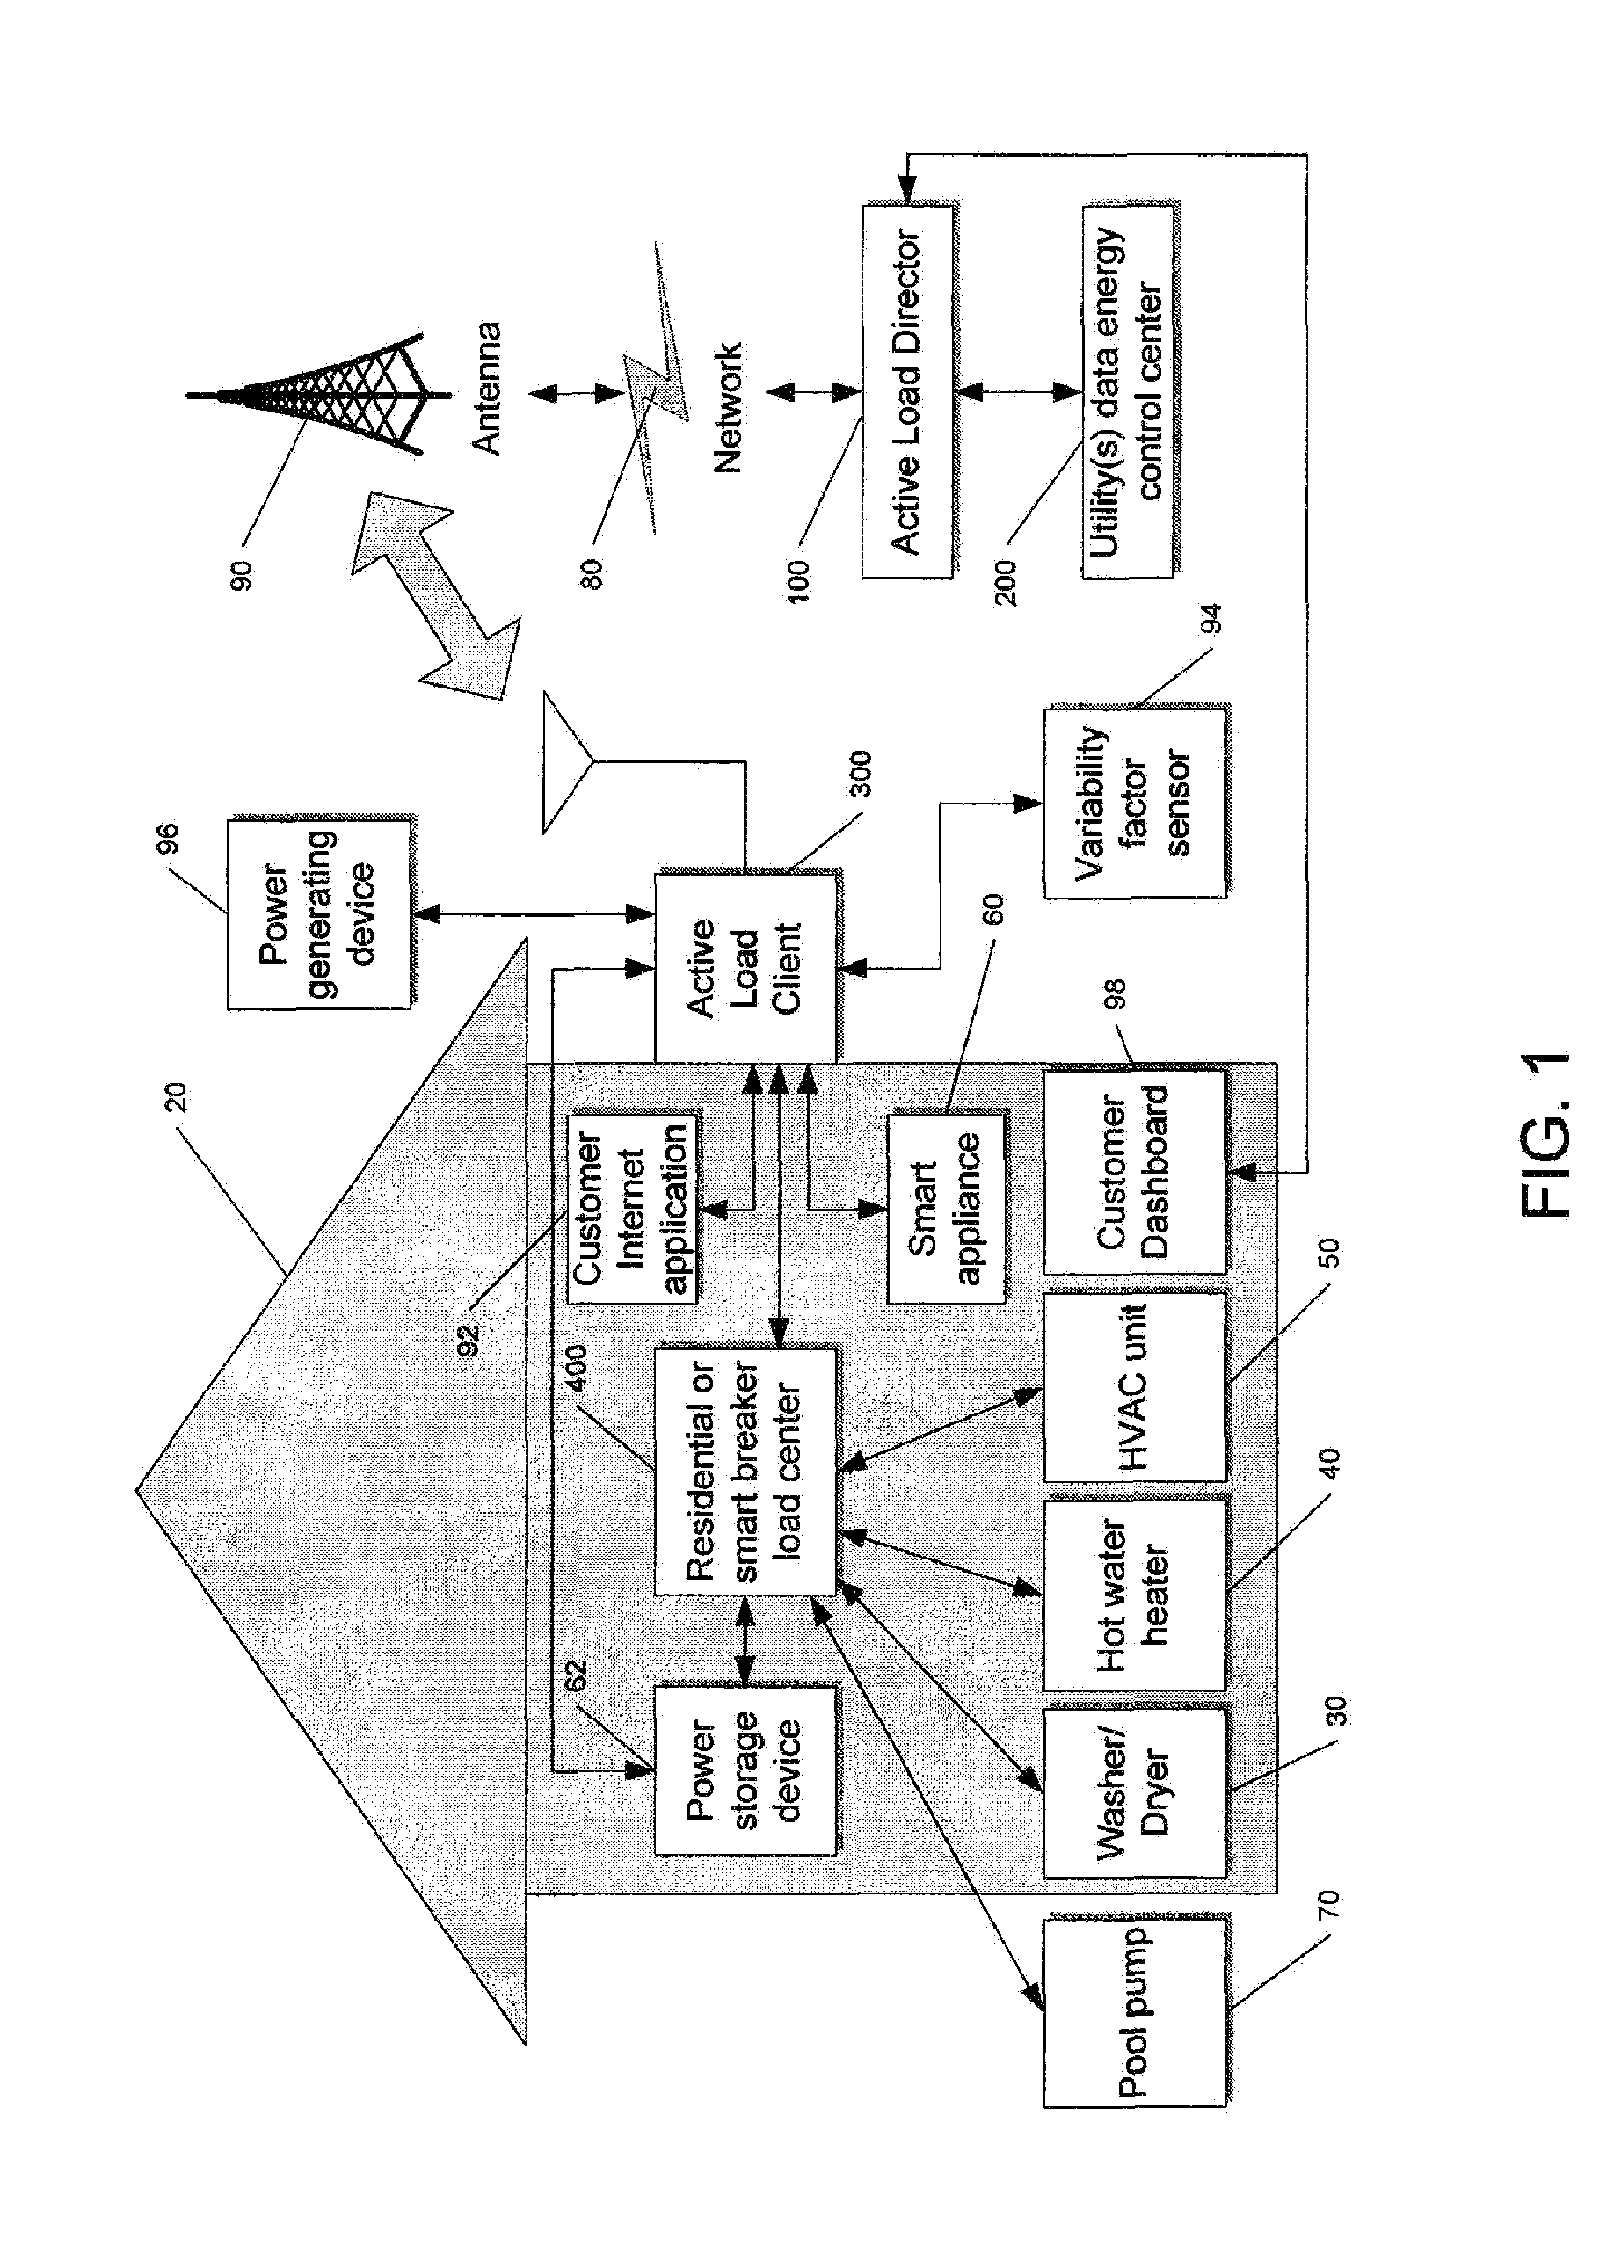 Systems and methods for determining and utilizing customer energy profiles for load control for individual structures, devices, and aggregation of same